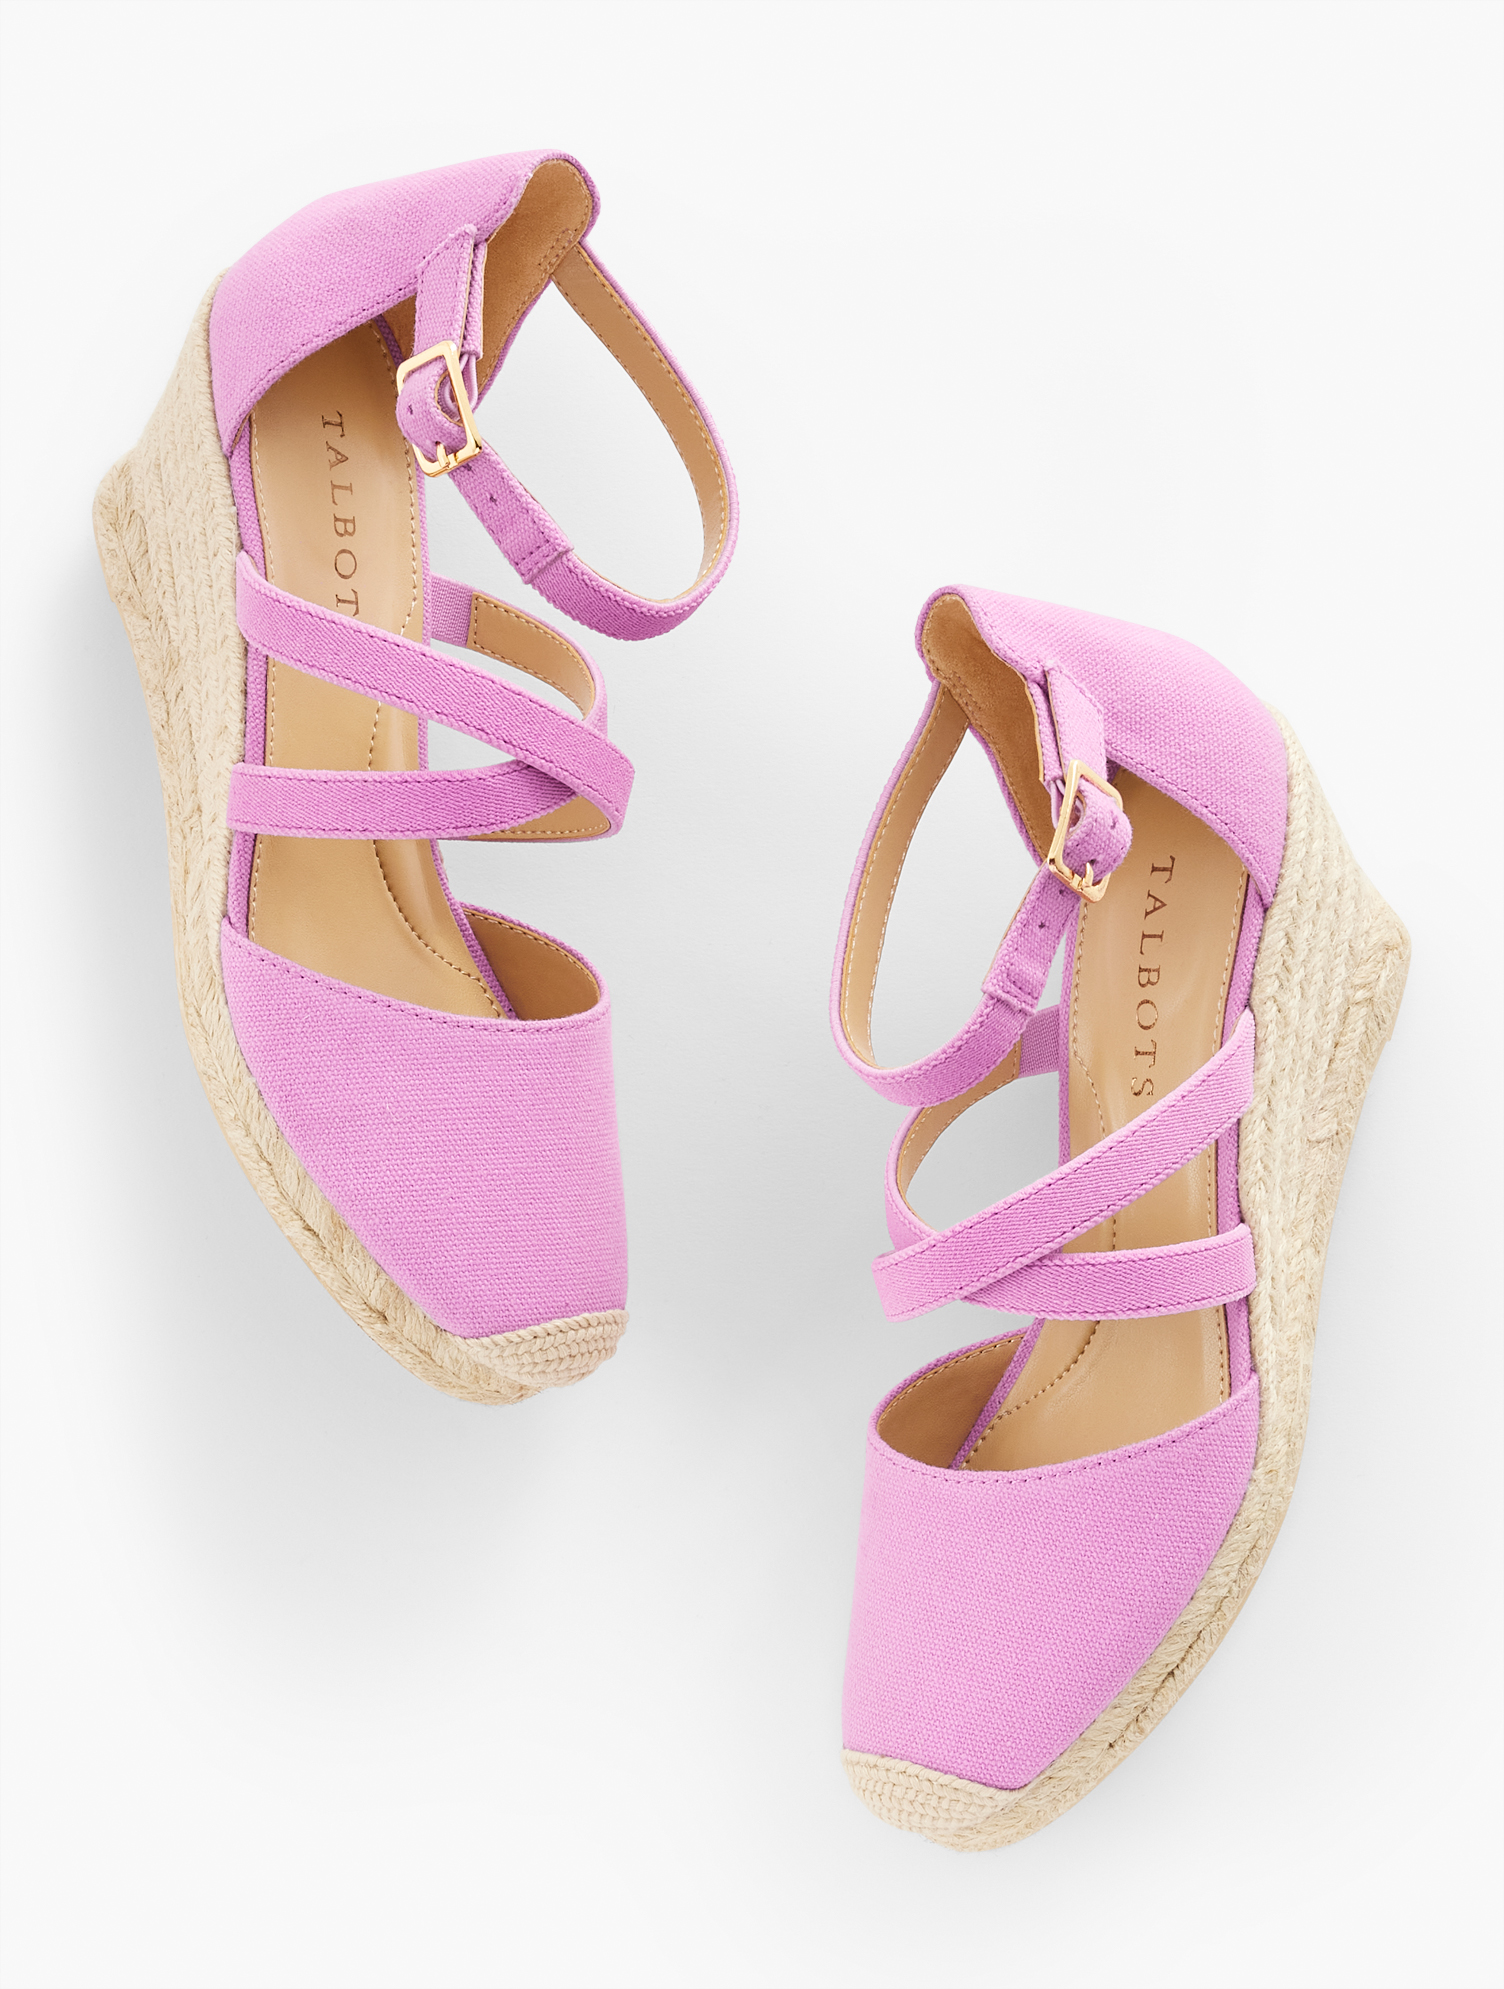 Talbots Lyndsay Strappy Canvas Espadrille Wedges - Orchid Bloom - 9m - 100% Cotton